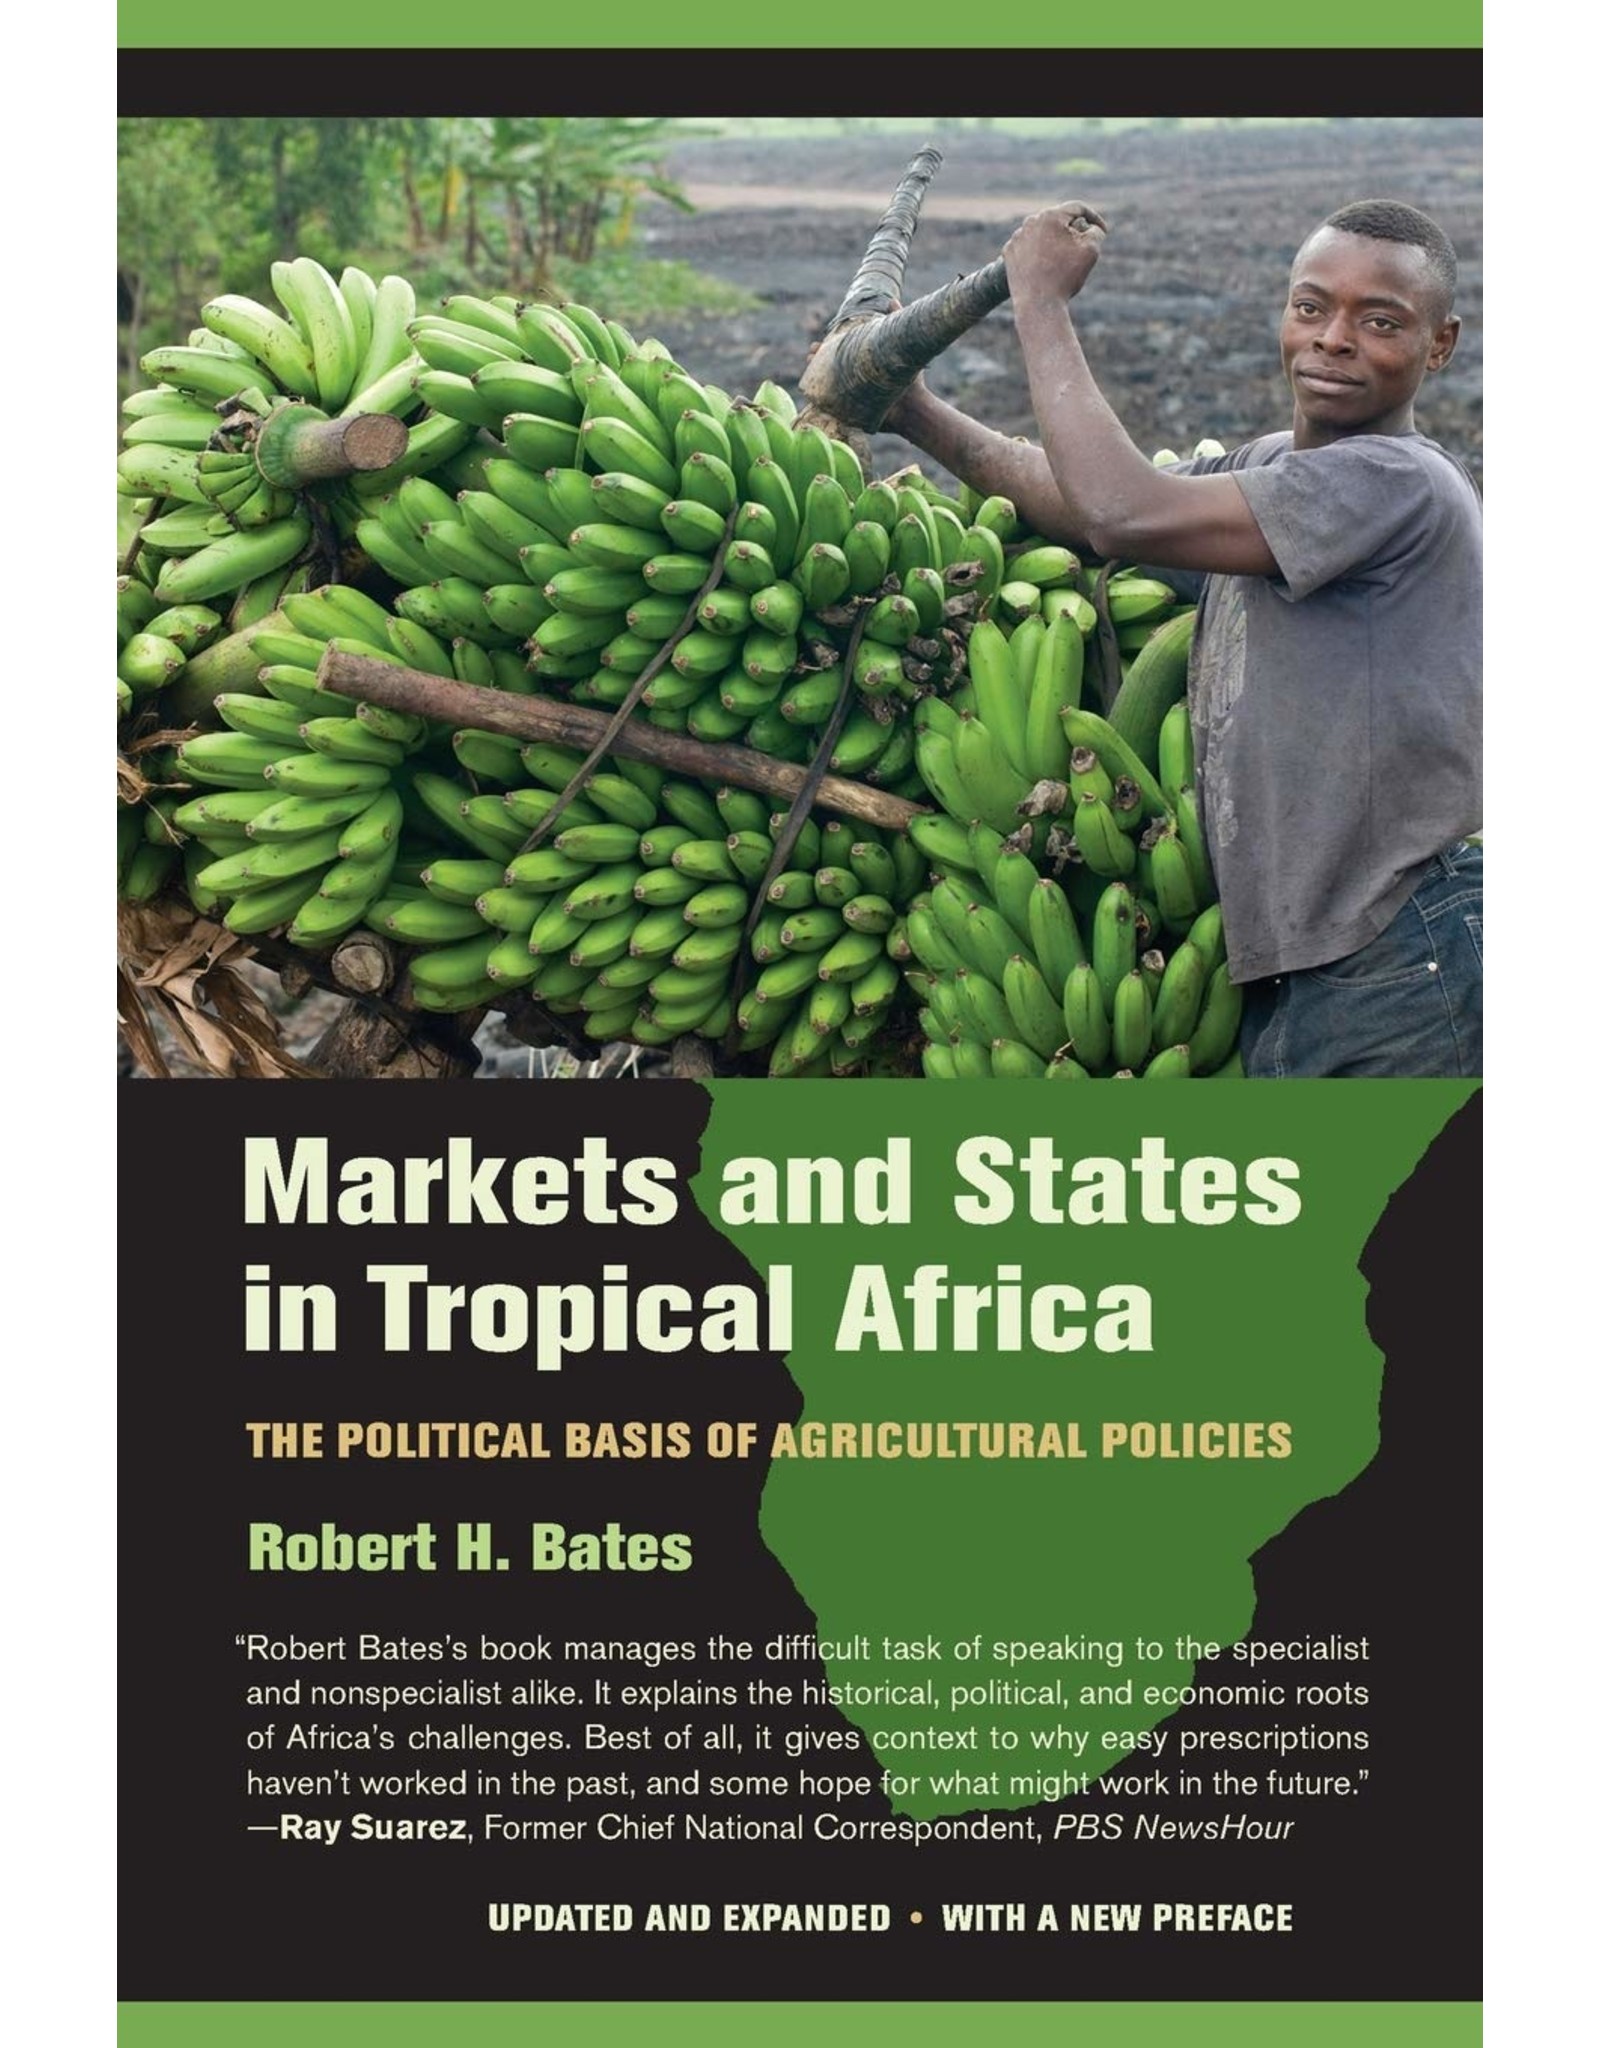 Literature Markets and States in Tropical Africa: The Political Basis of Agricultural Policies